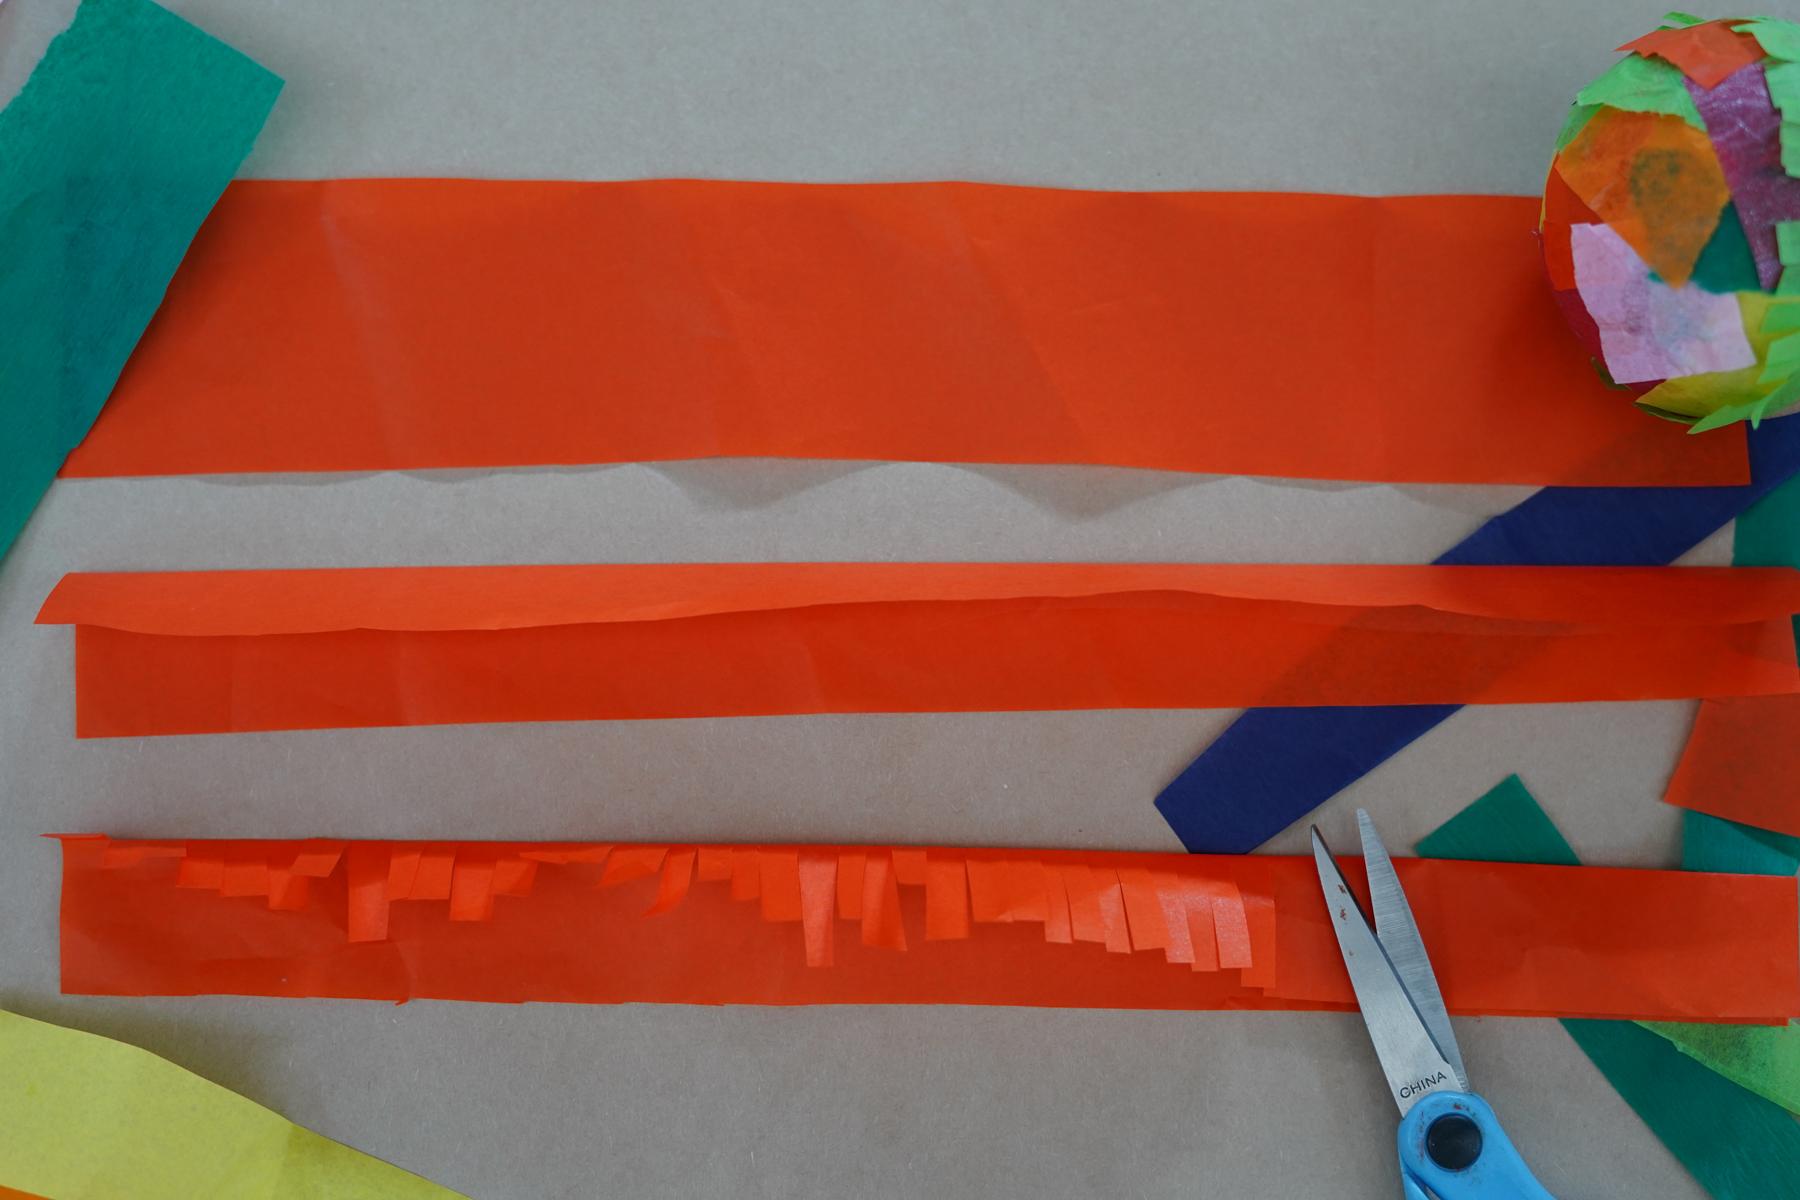 Photo of three pieces of tissue paper: one wide flat piece, one piece folded in half, and the last piece folded with cuts in it making a fringe effect